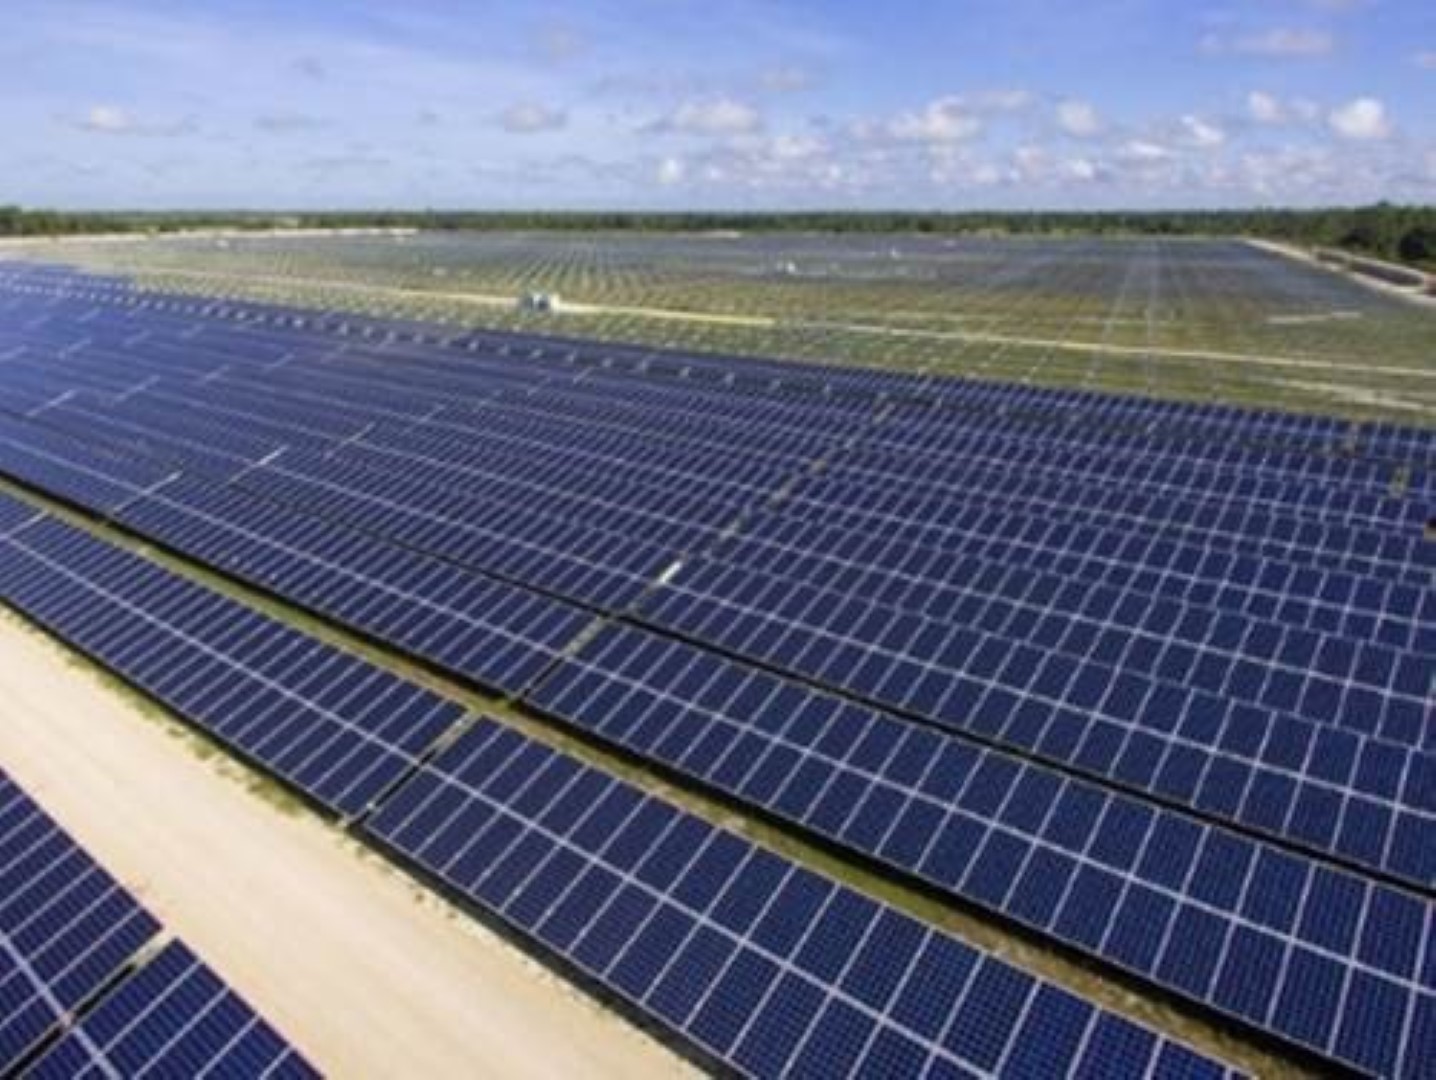 FPL to build 8 new Florida solar energy plants, add 2.5M panels by 2018